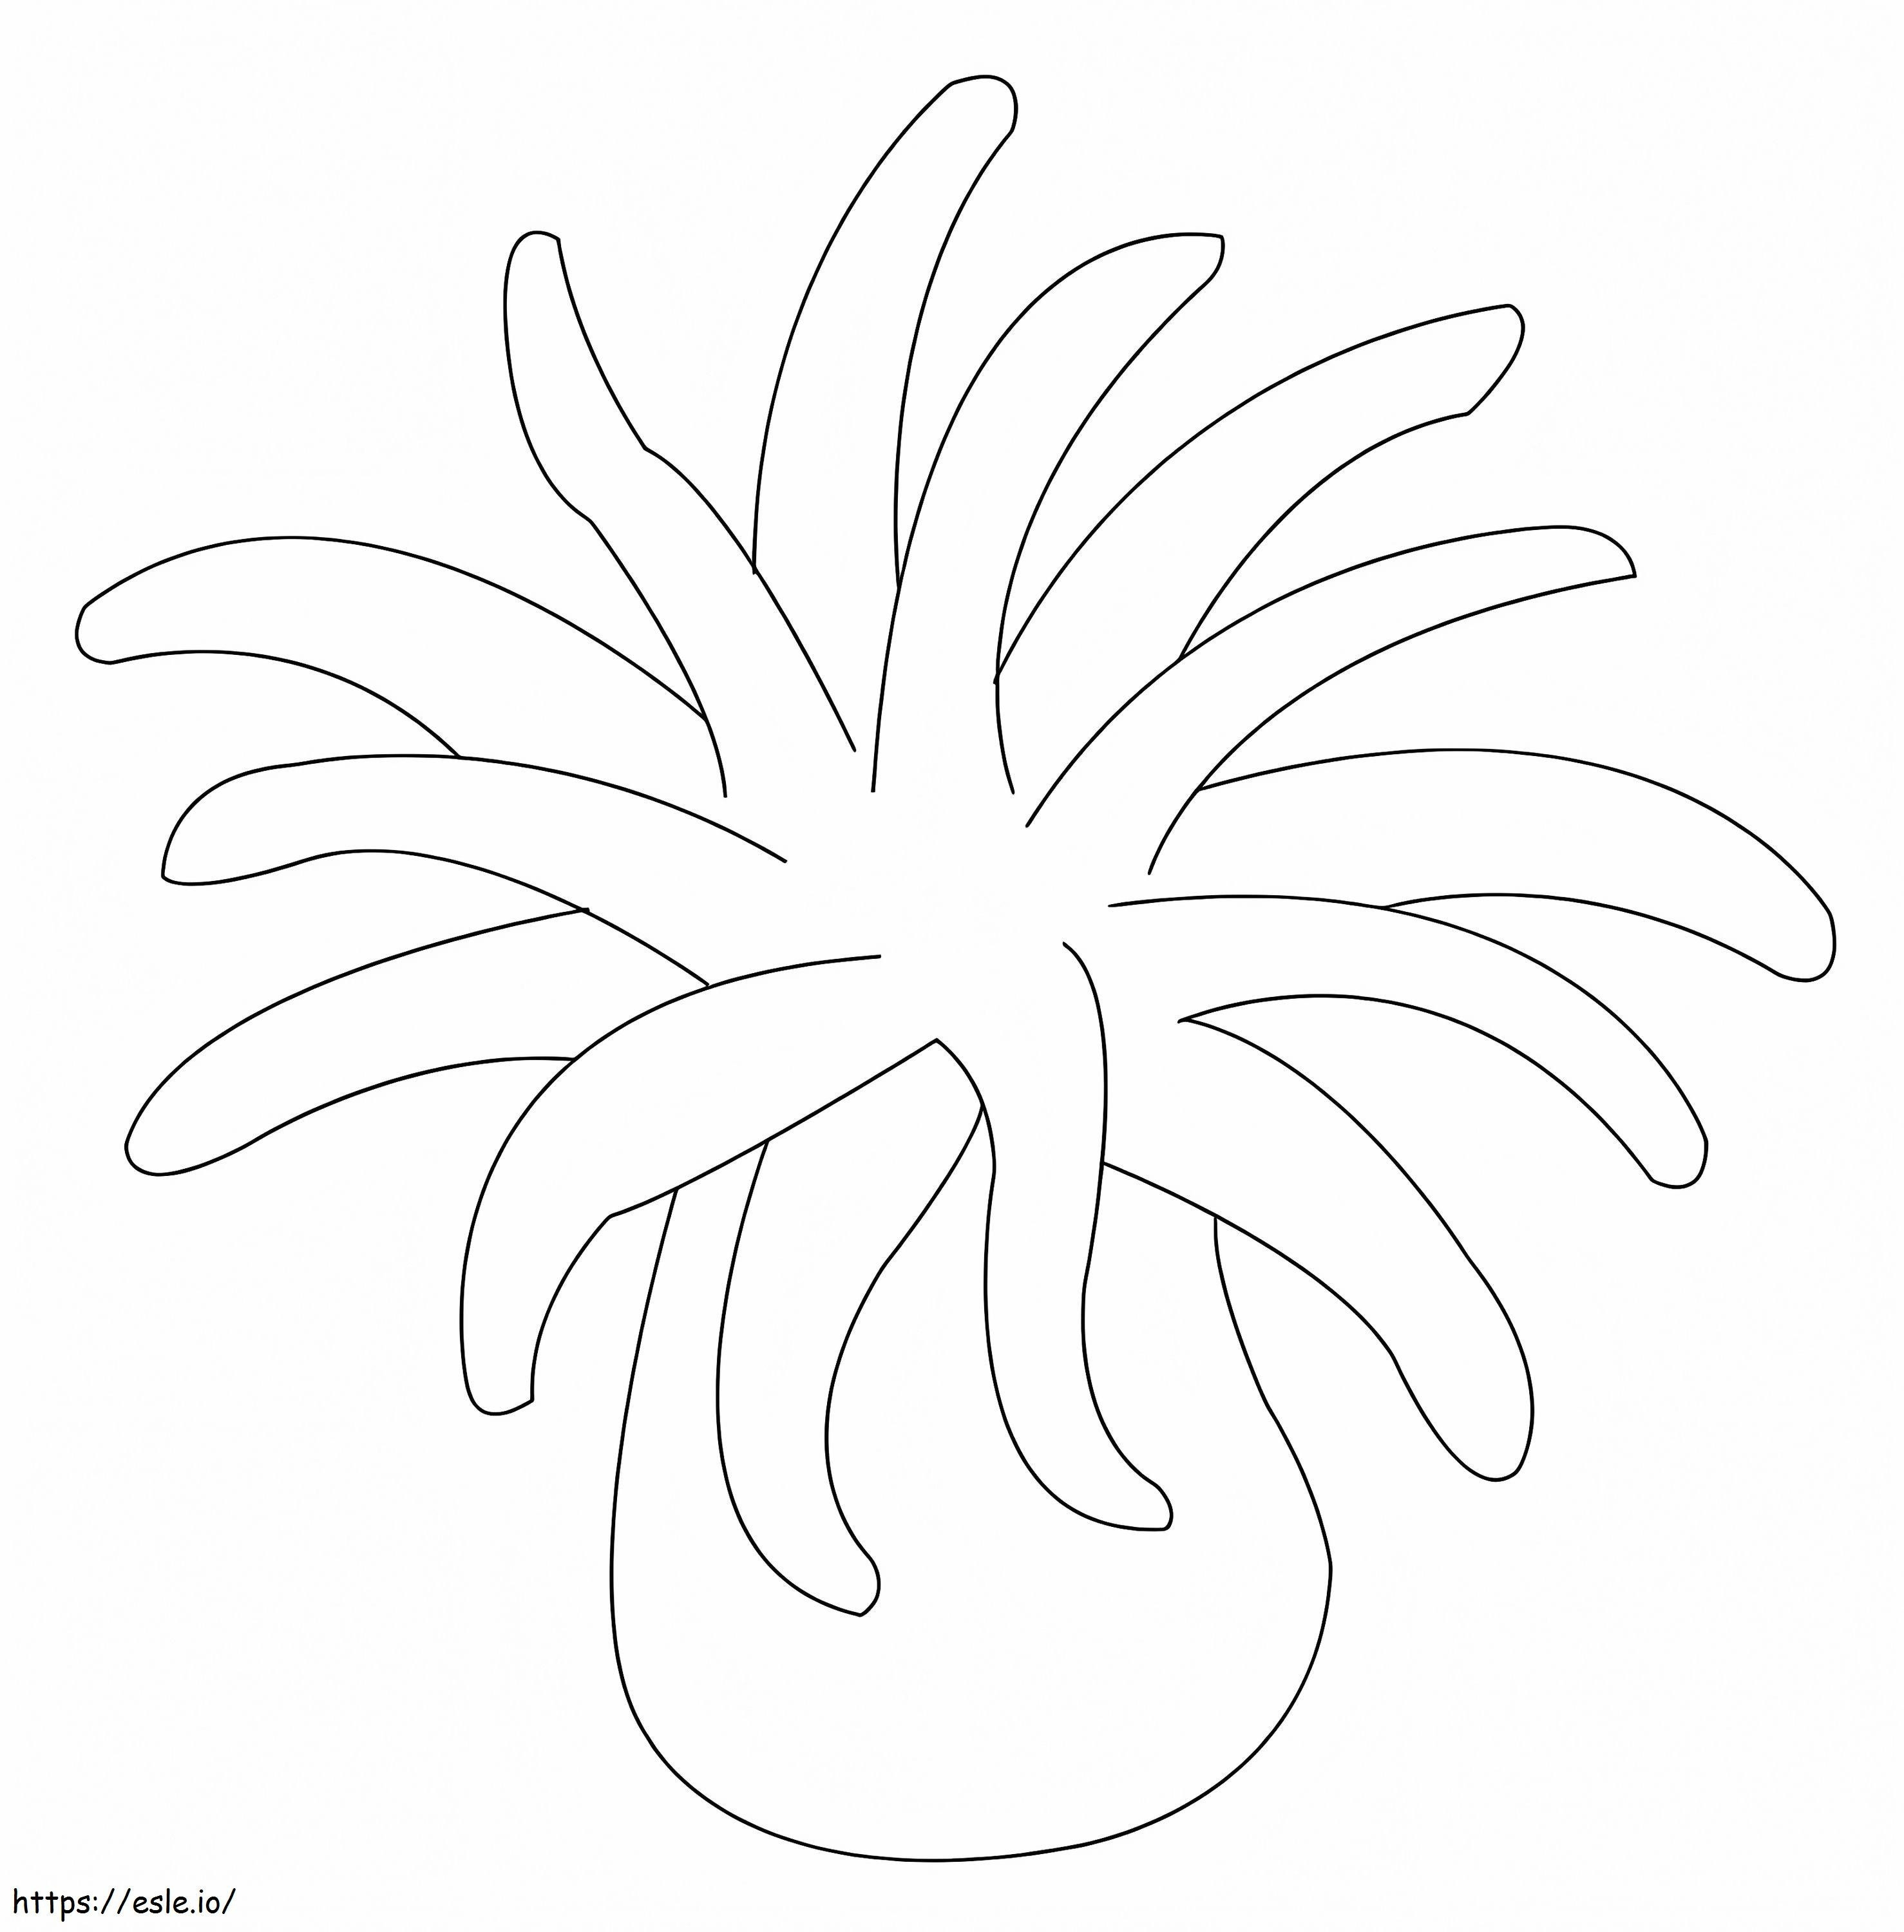 Simple Sea Anemone coloring page